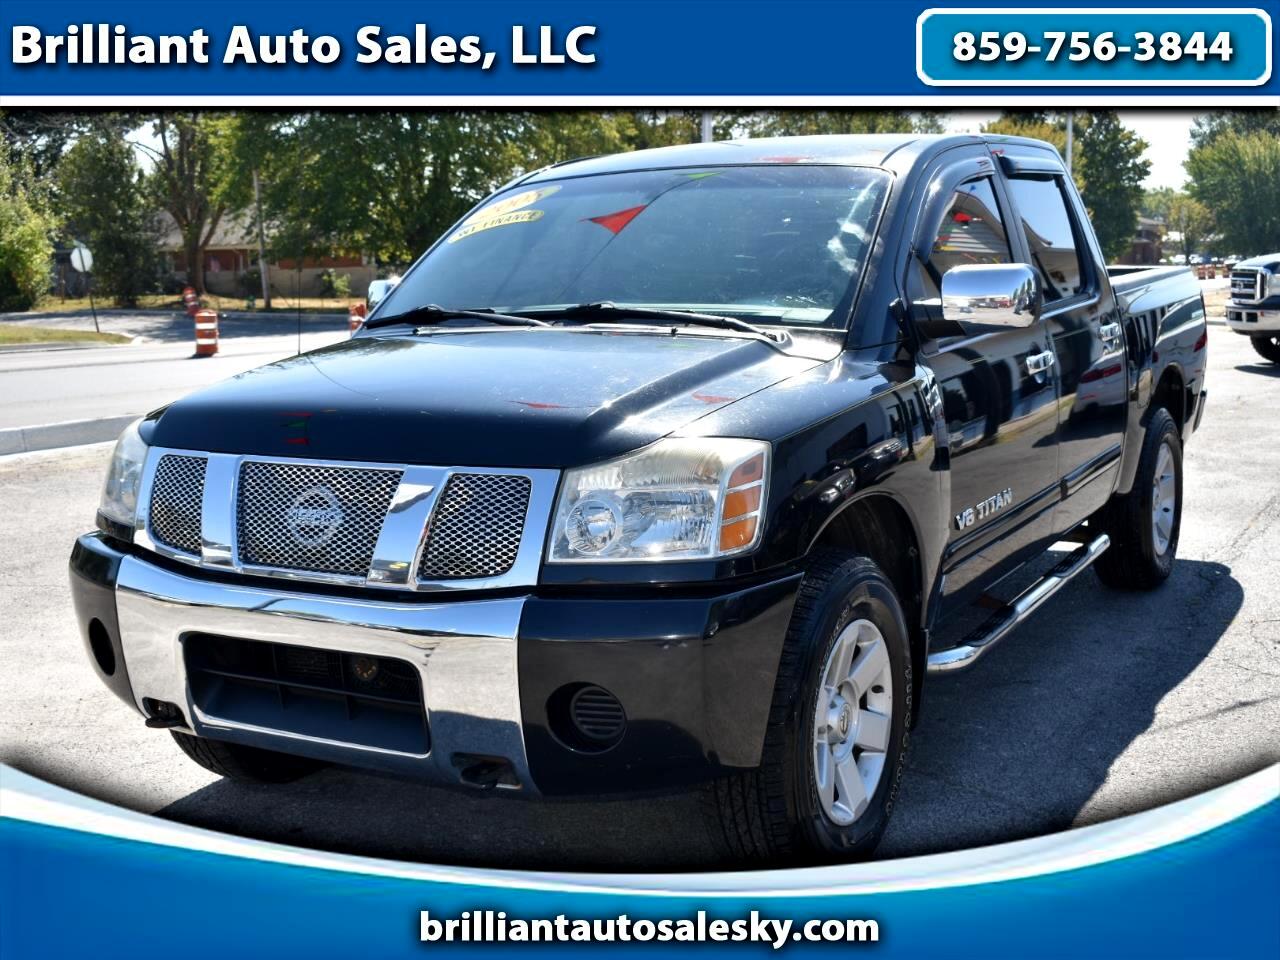 Used Cars For Sale Berea Ky 40403 Brilliant Auto Sales Llc